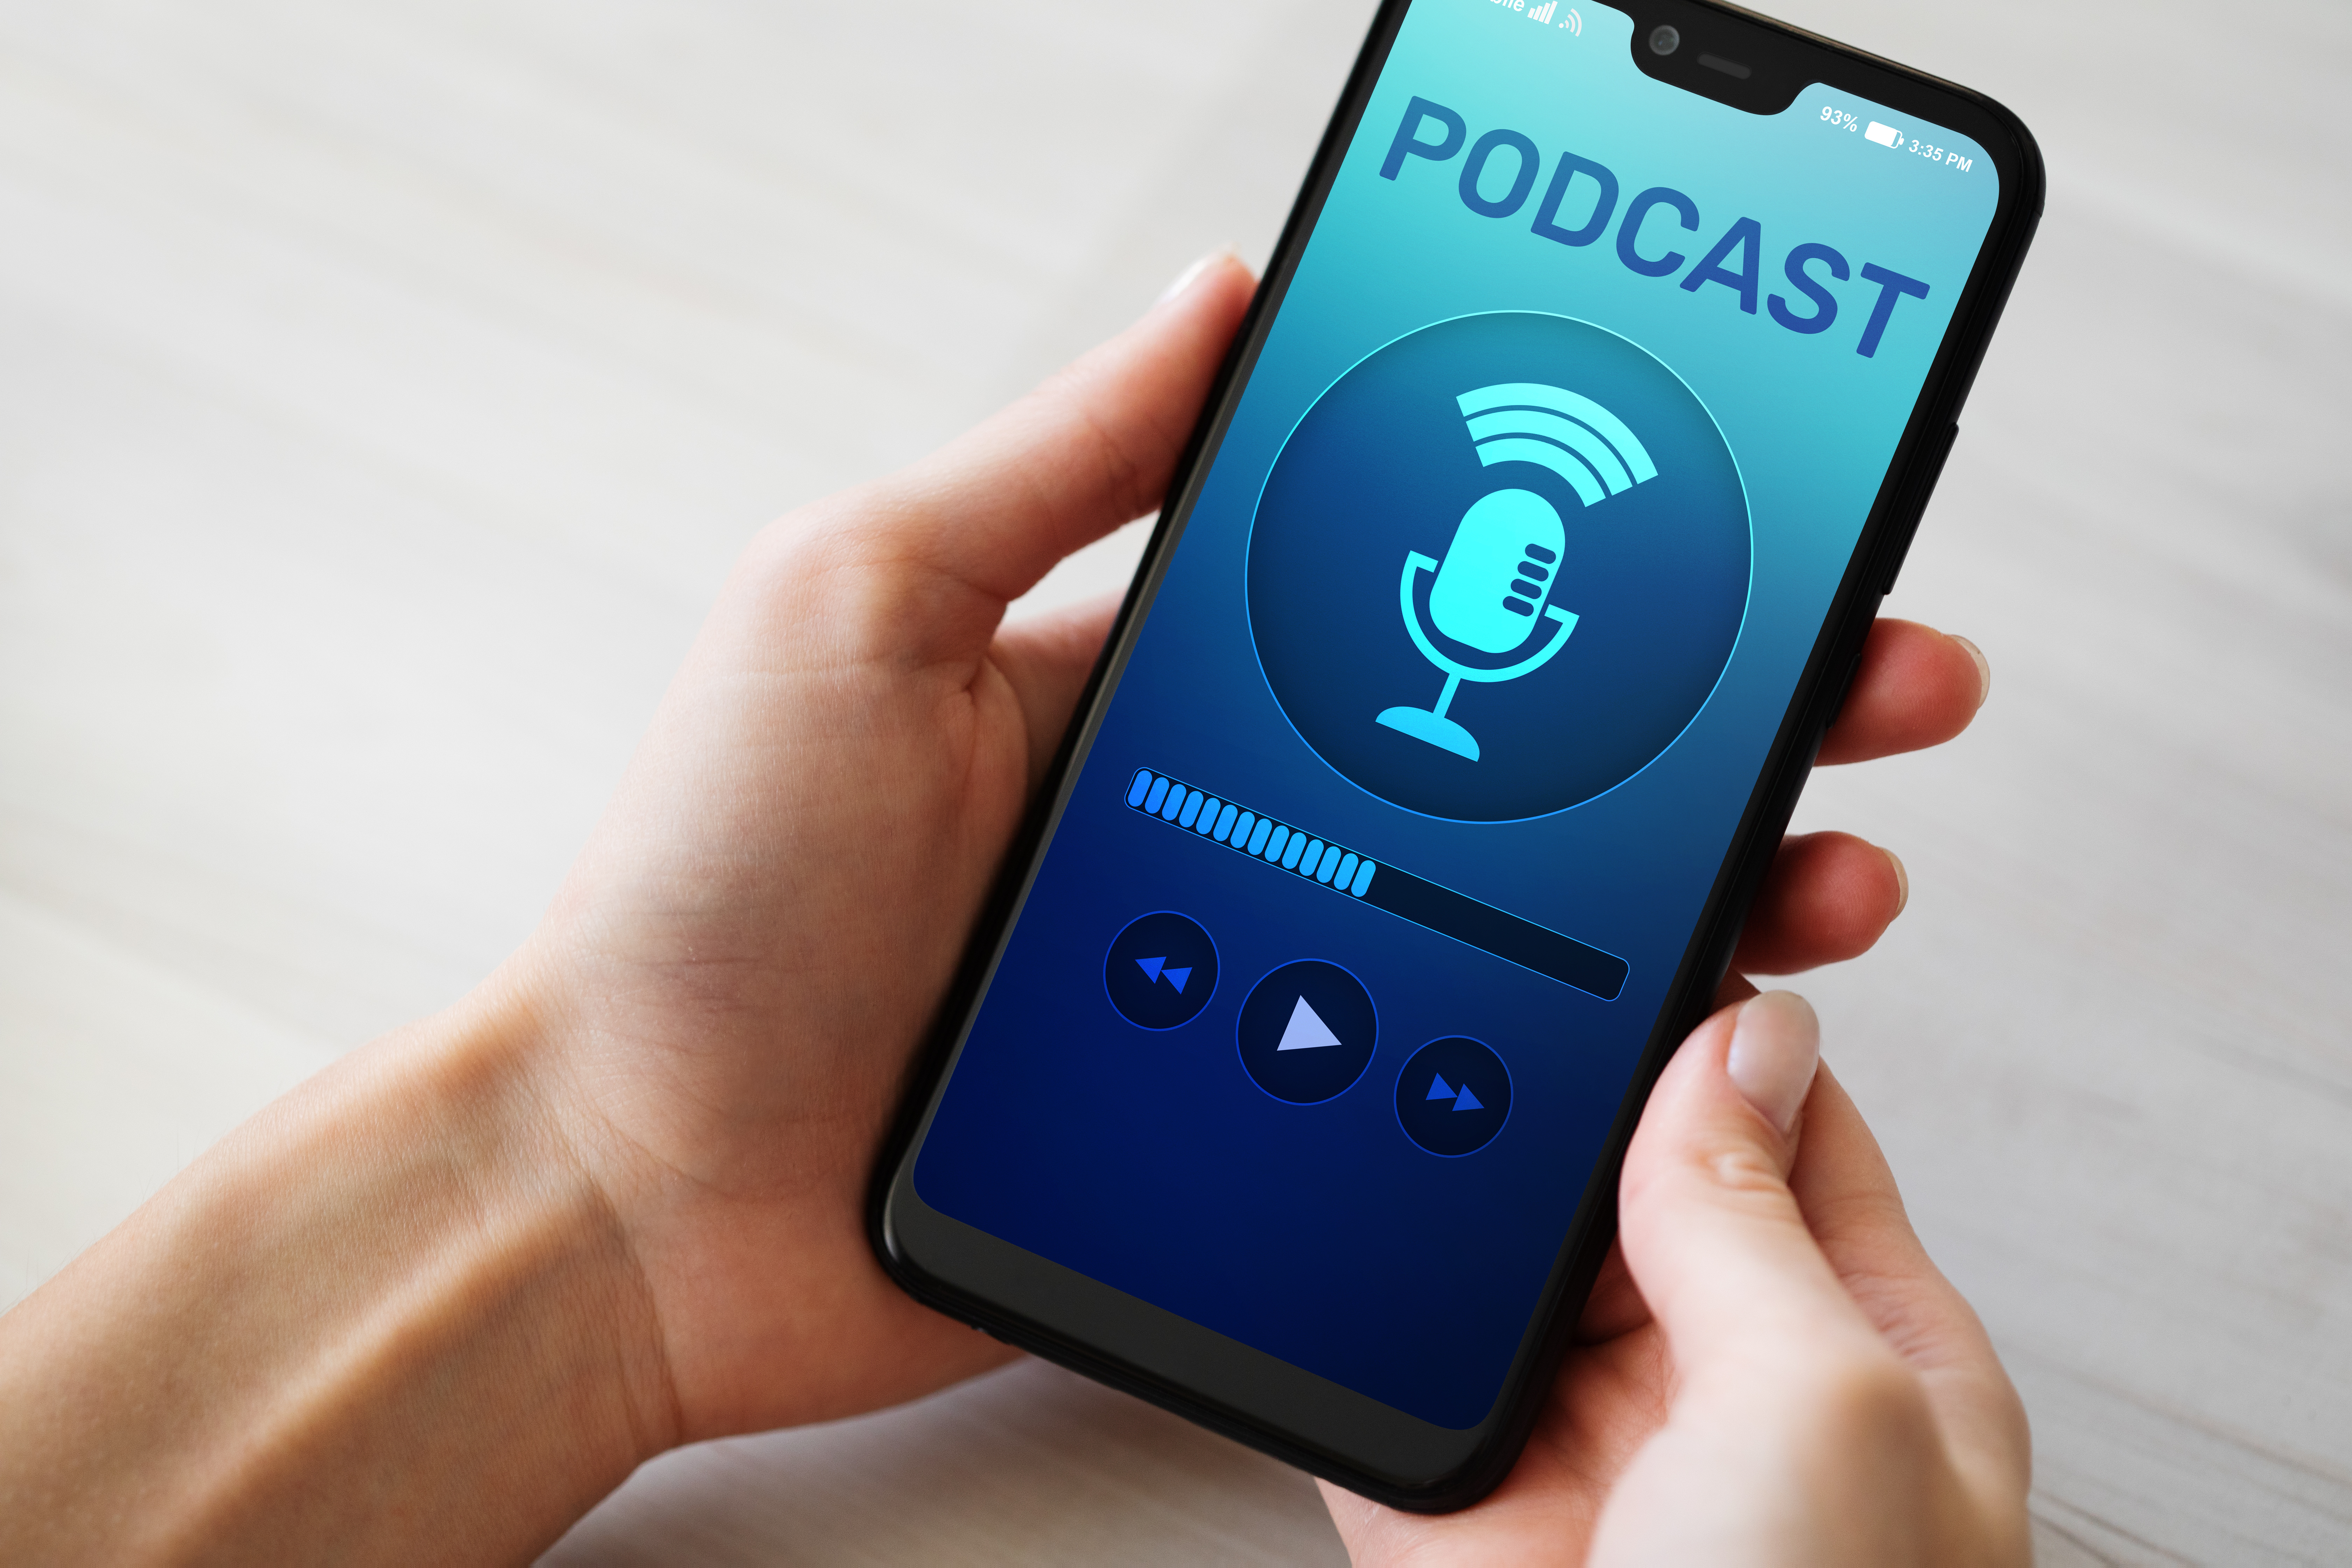 Business podcast on mobile phone